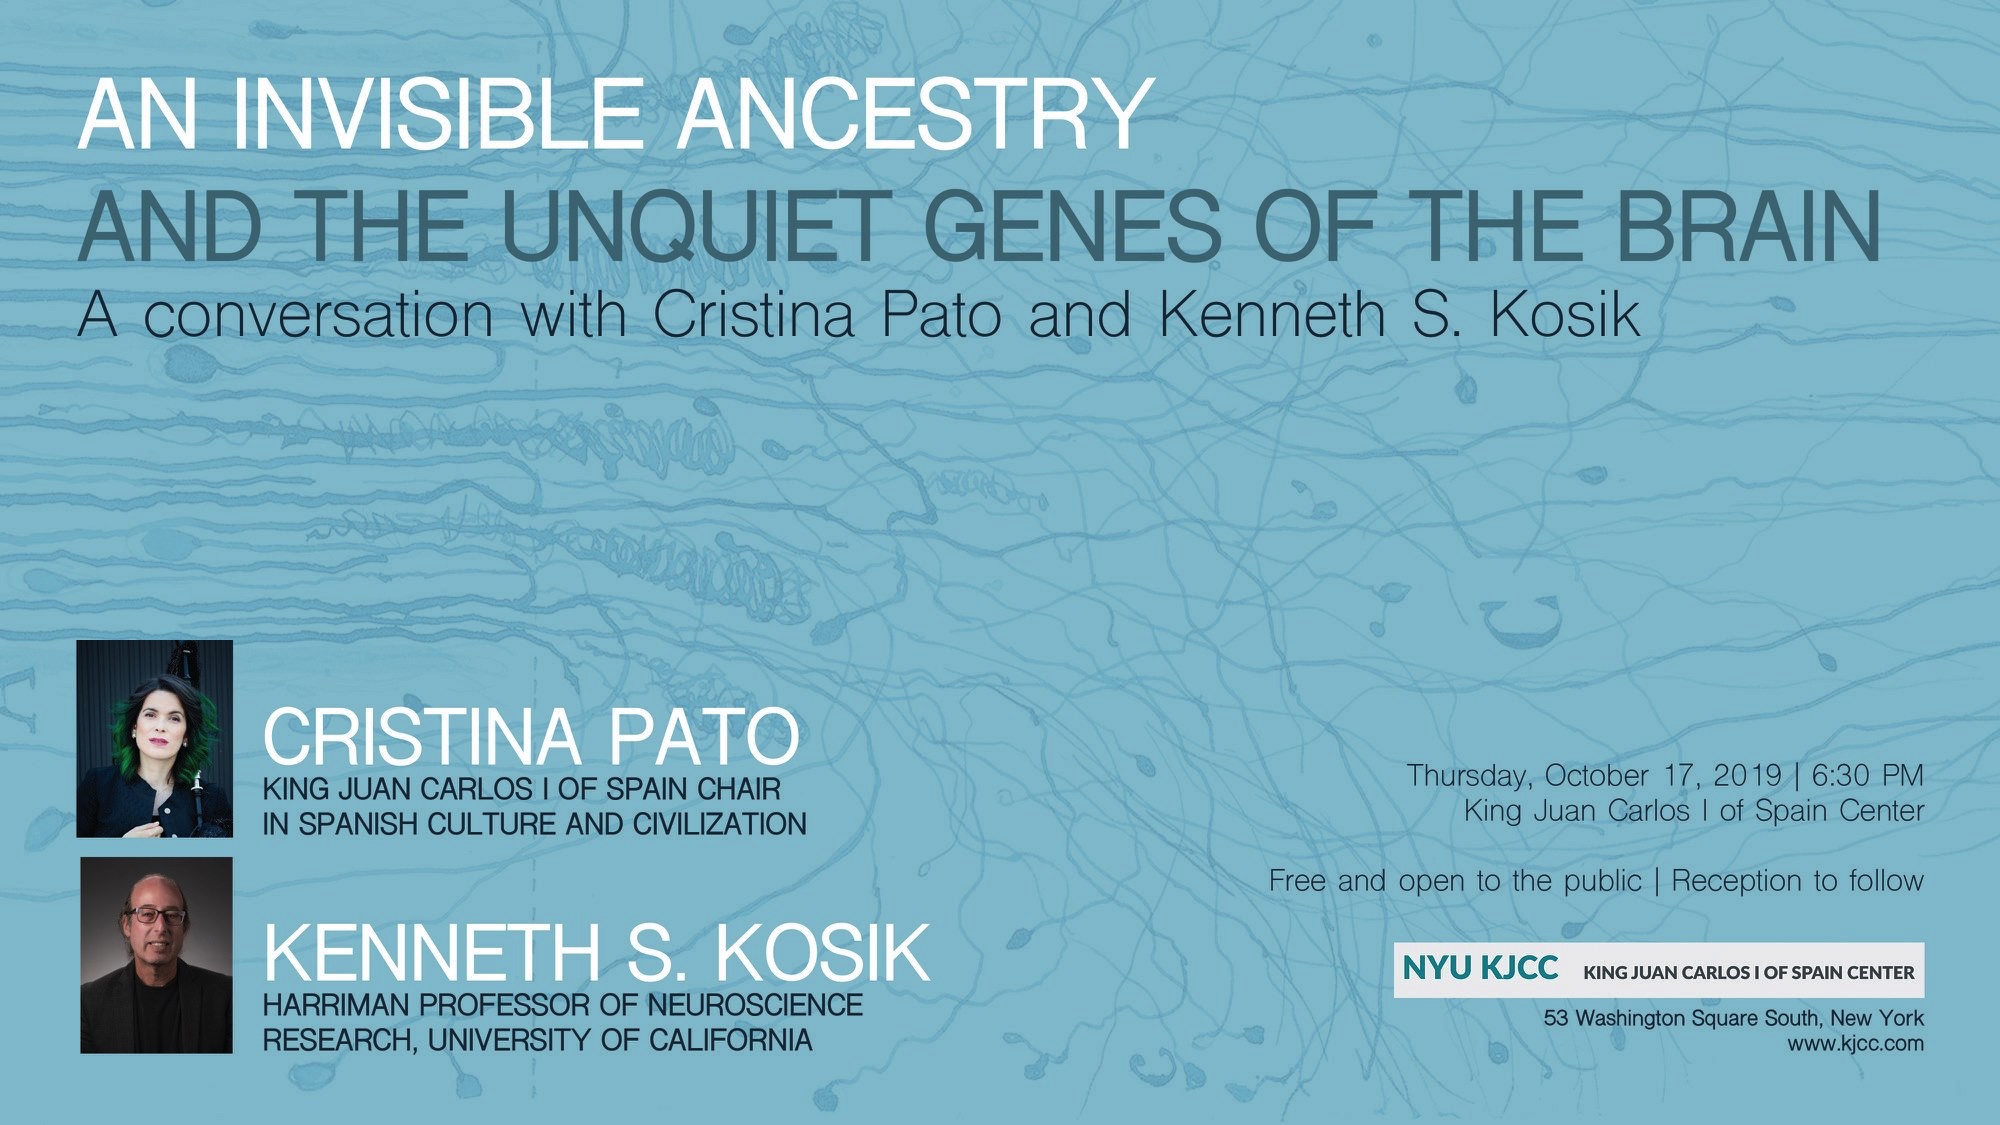 King Juan Carlos Chair CRISTINA PATO | A CONVERSATION WITH CRISTINA PATO AND KENNETH S. KOSIK: An Invisible Ancestry and the Unquiet Genes of the Brain